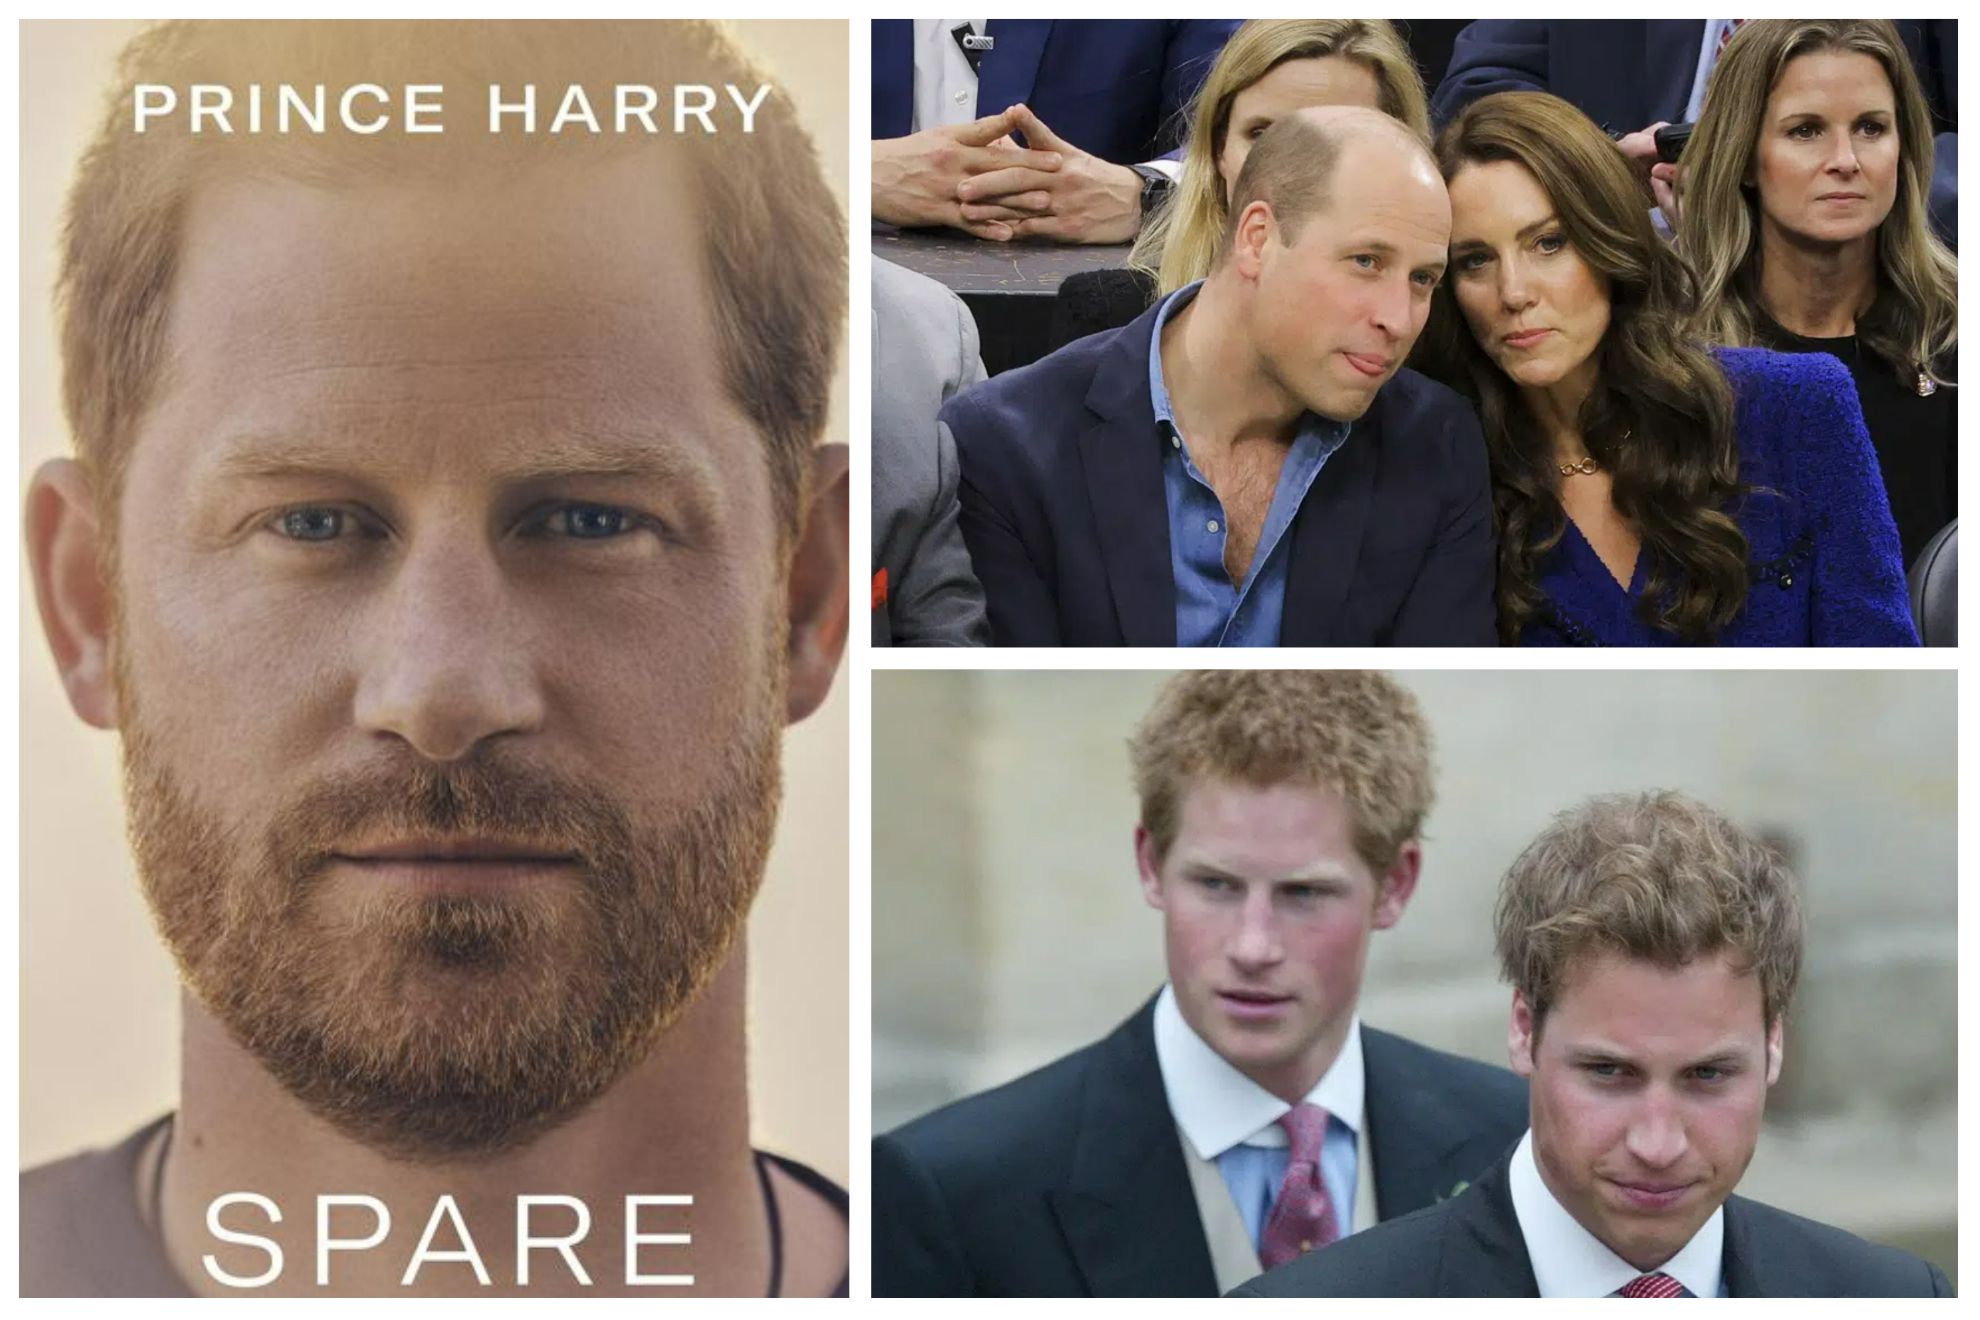 Prince Harry's memoir doesn't seem like it will get him in any better terms with his brother